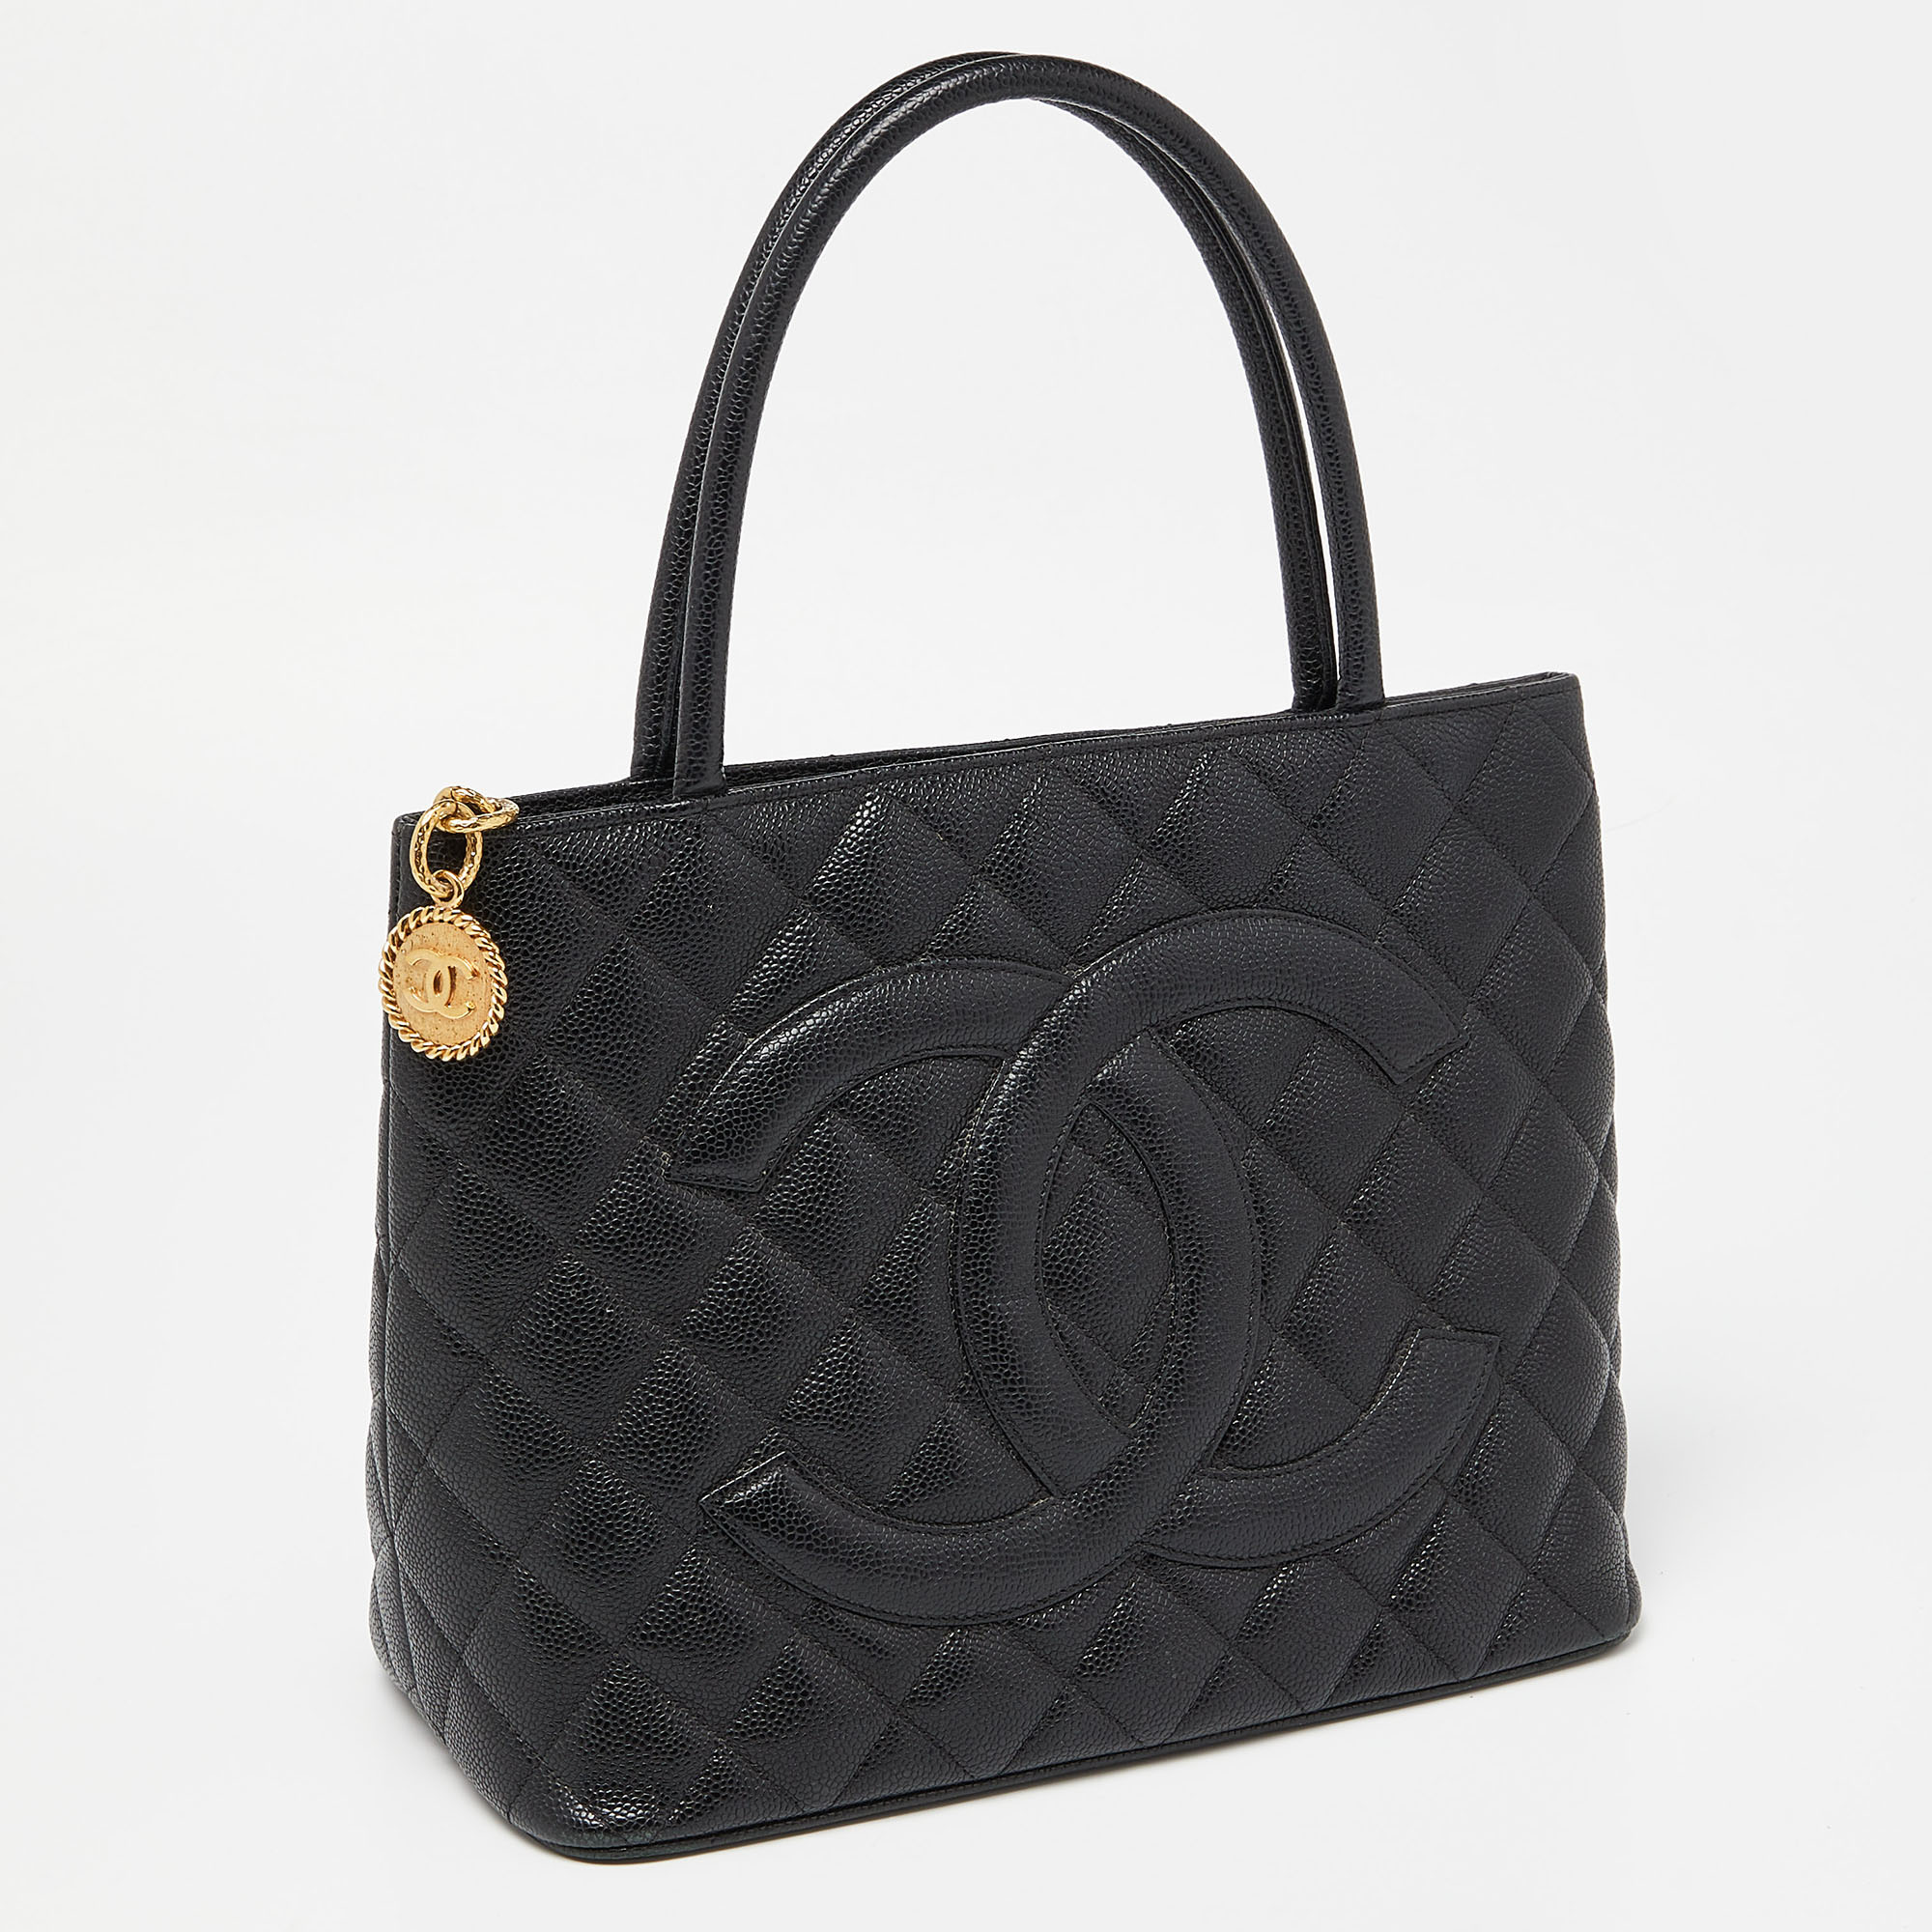 Chanel Black Quilted Caviar Leather Medallion Bag